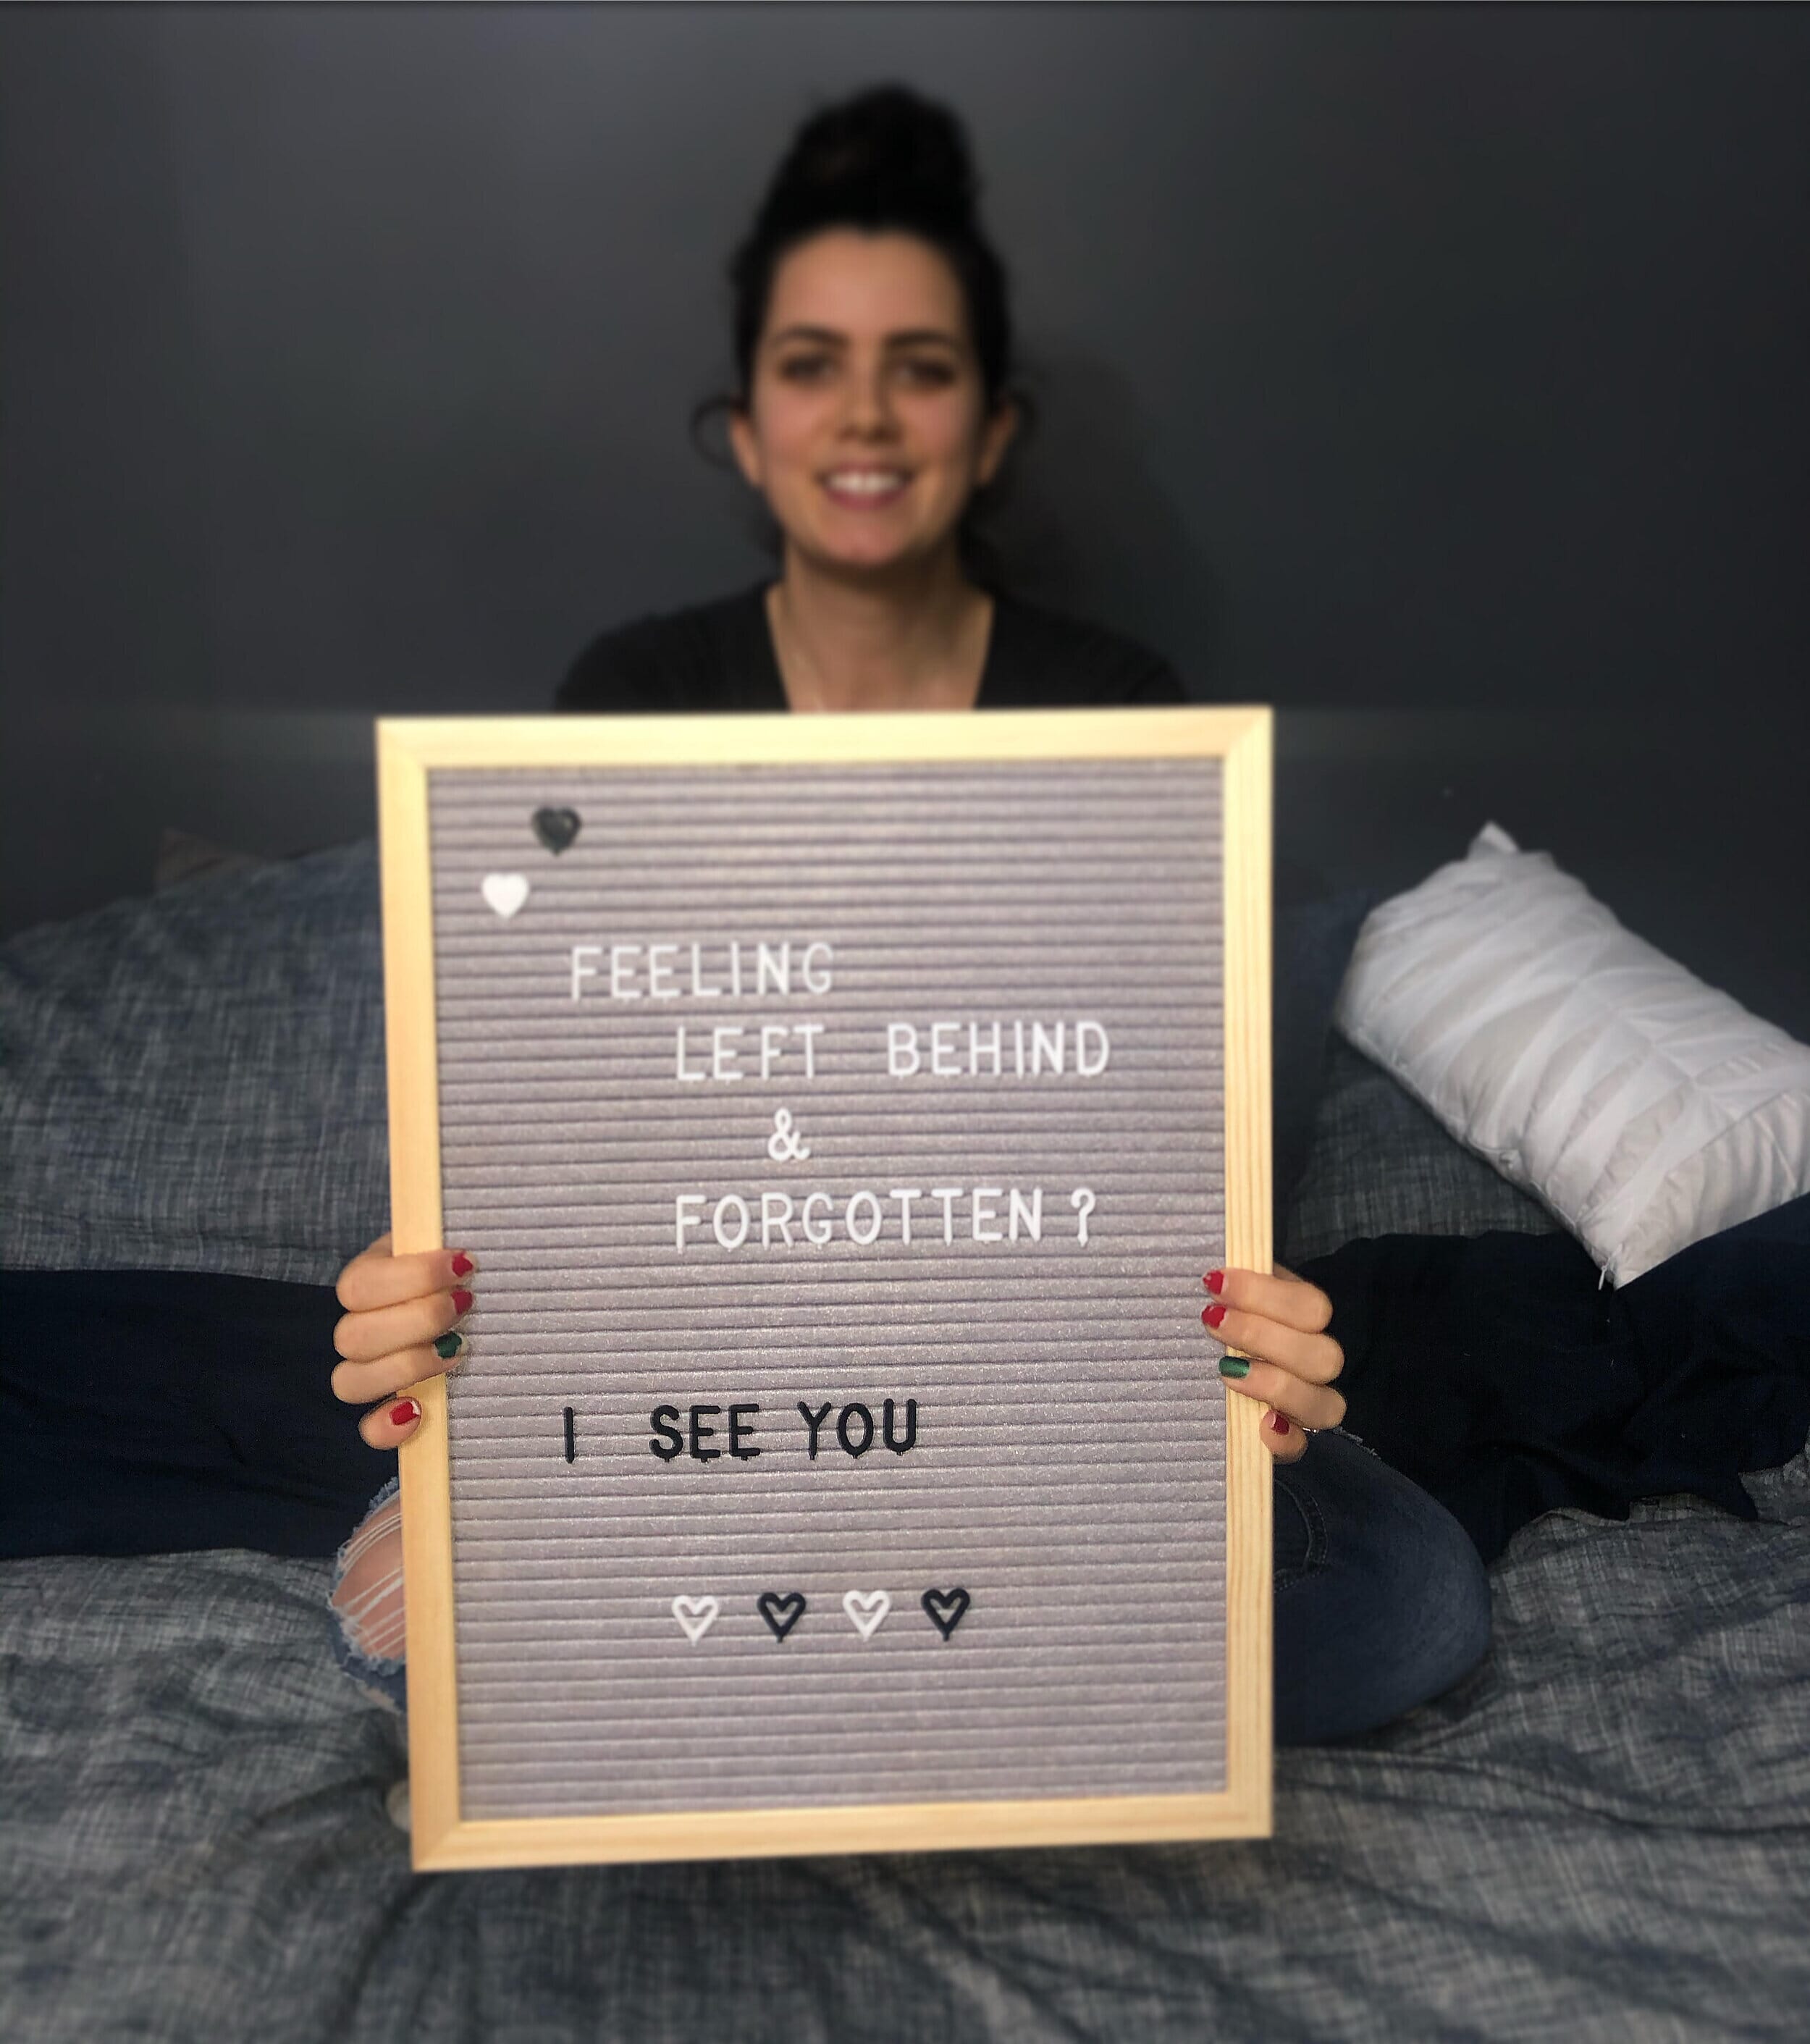 fertility warrior amy baker holding a sign that reads "feeling left behind and forgotten? i see you" 